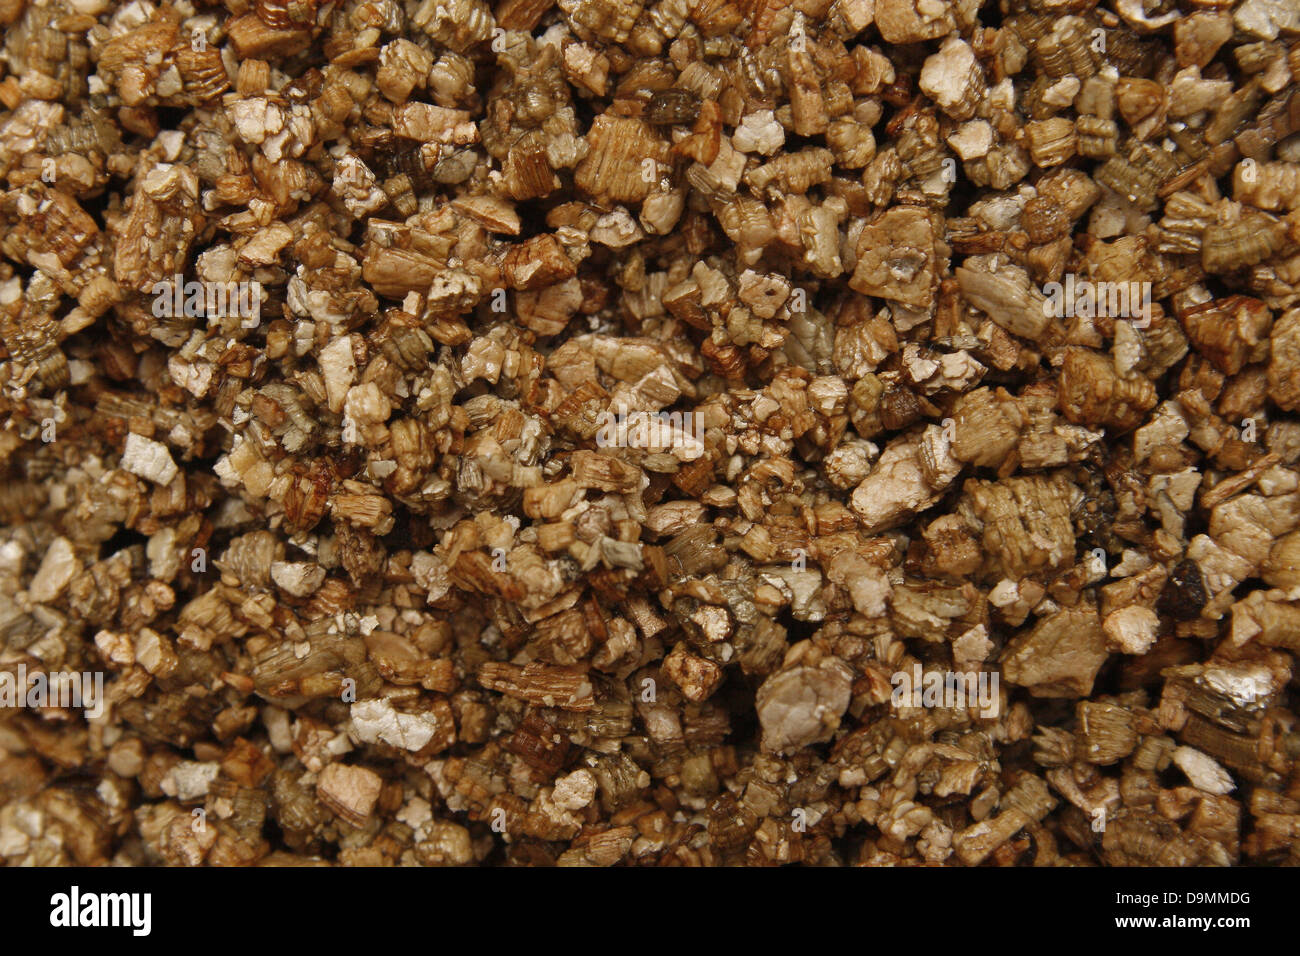 close up image of moist vermiculite pieces Stock Photo